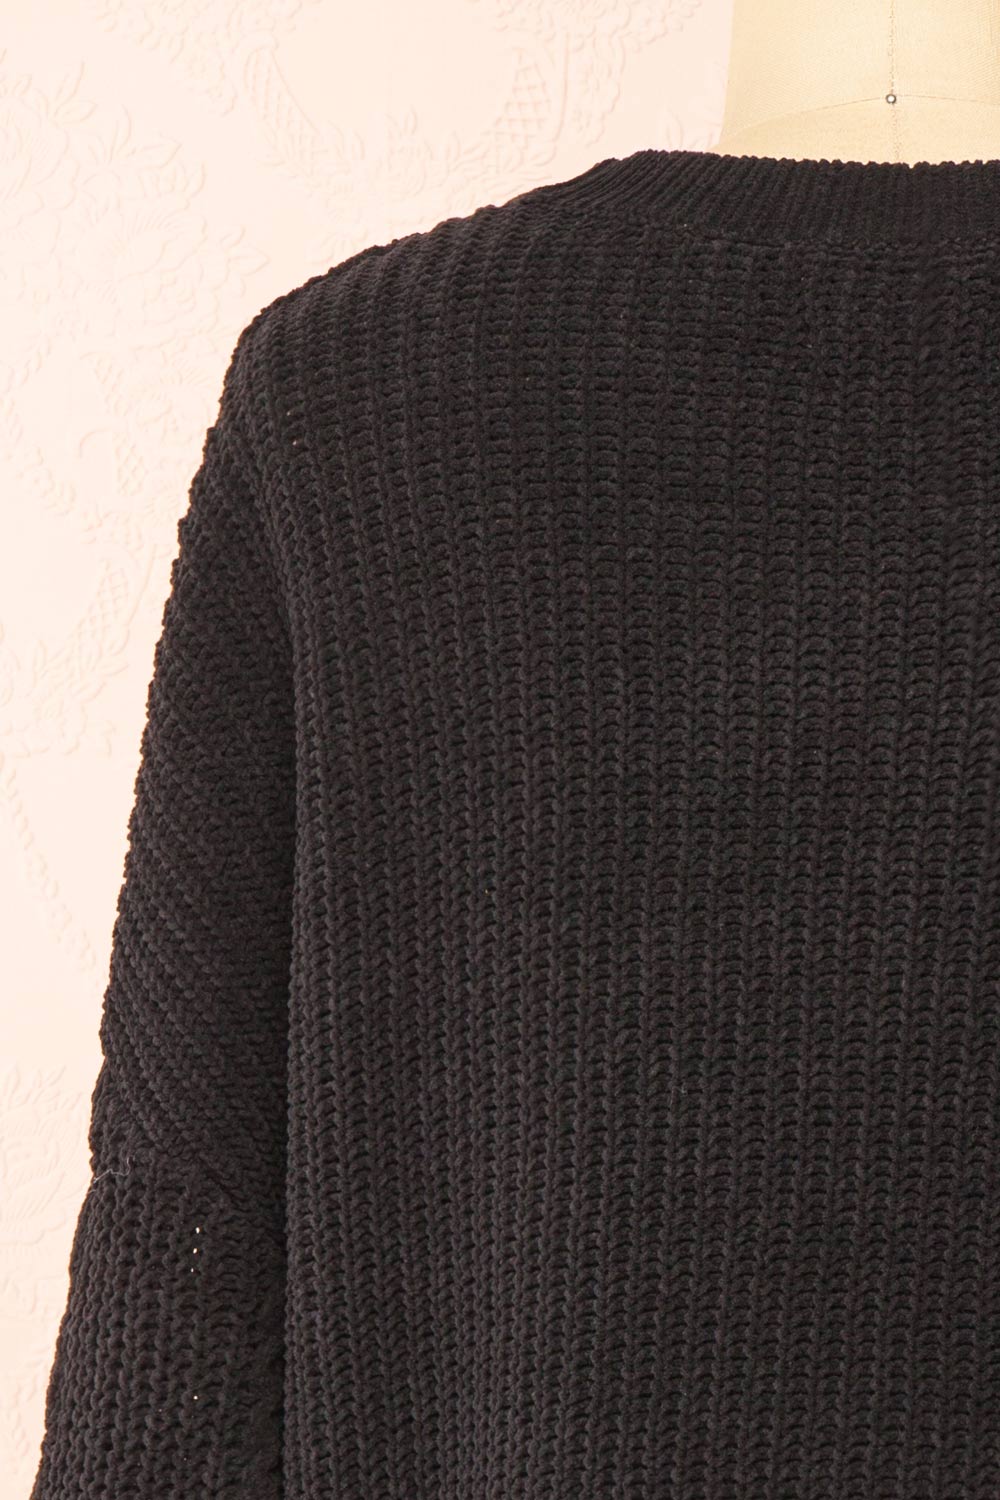 Madeleine Black Cropped Cable Knit Sweater | Boutique 1861 back close-up